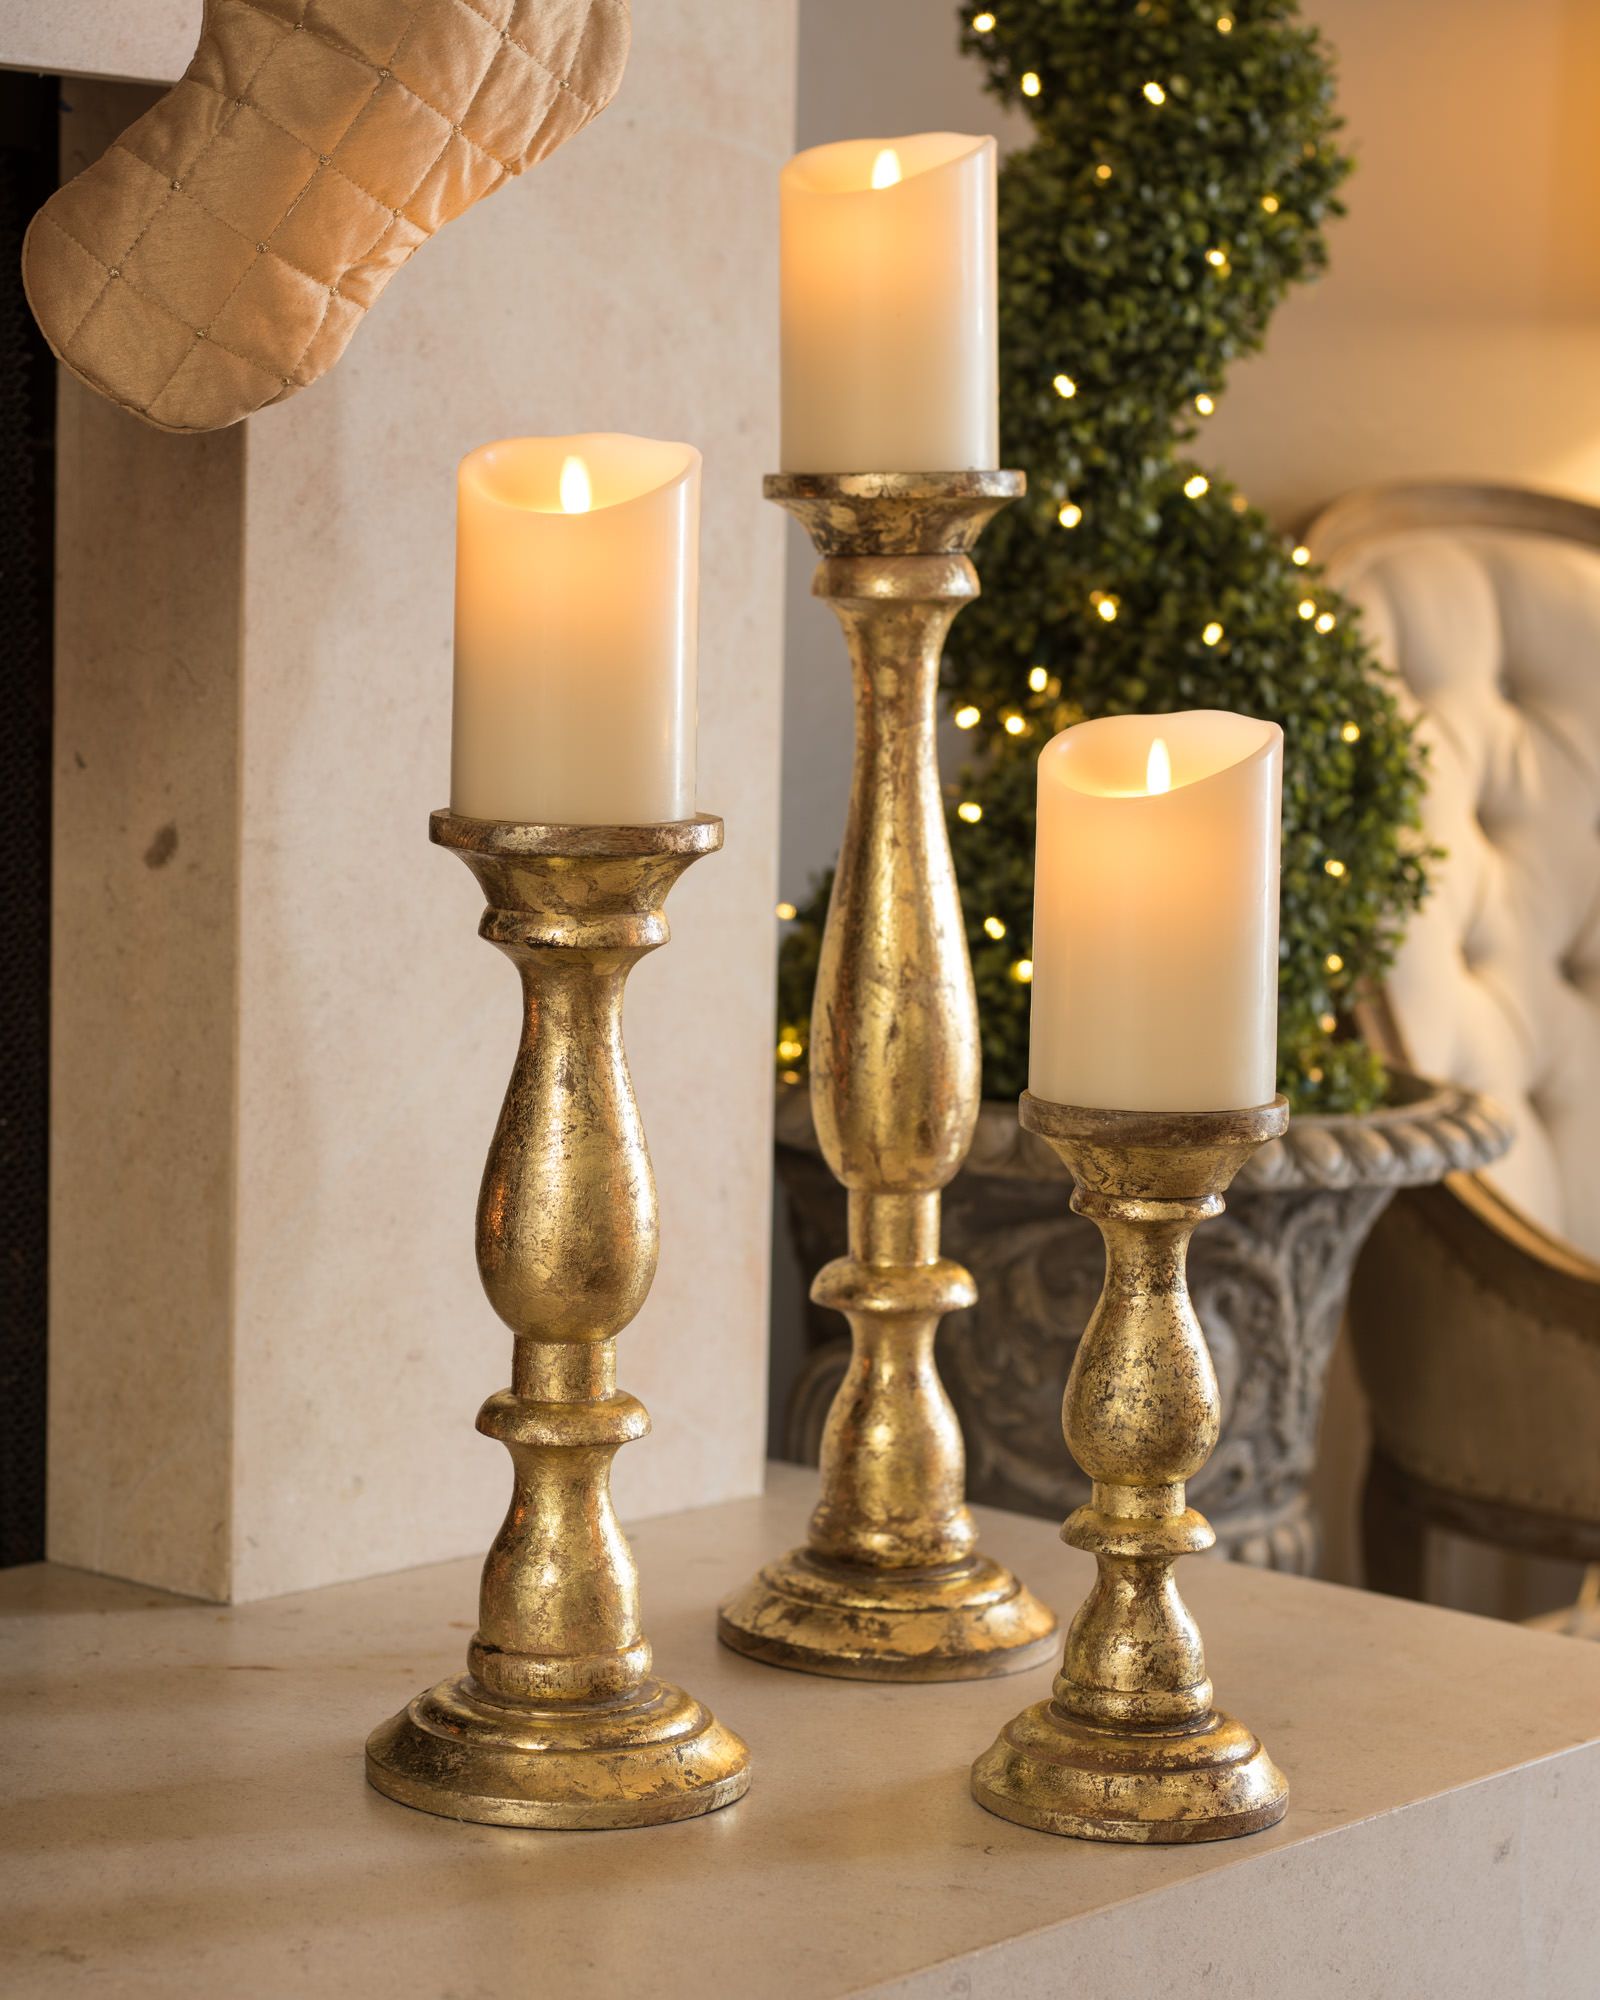 Candle Holders for Fireplace Mantel Lovely Pin by Judy Wicker On Candles and Candle Holders In 2019